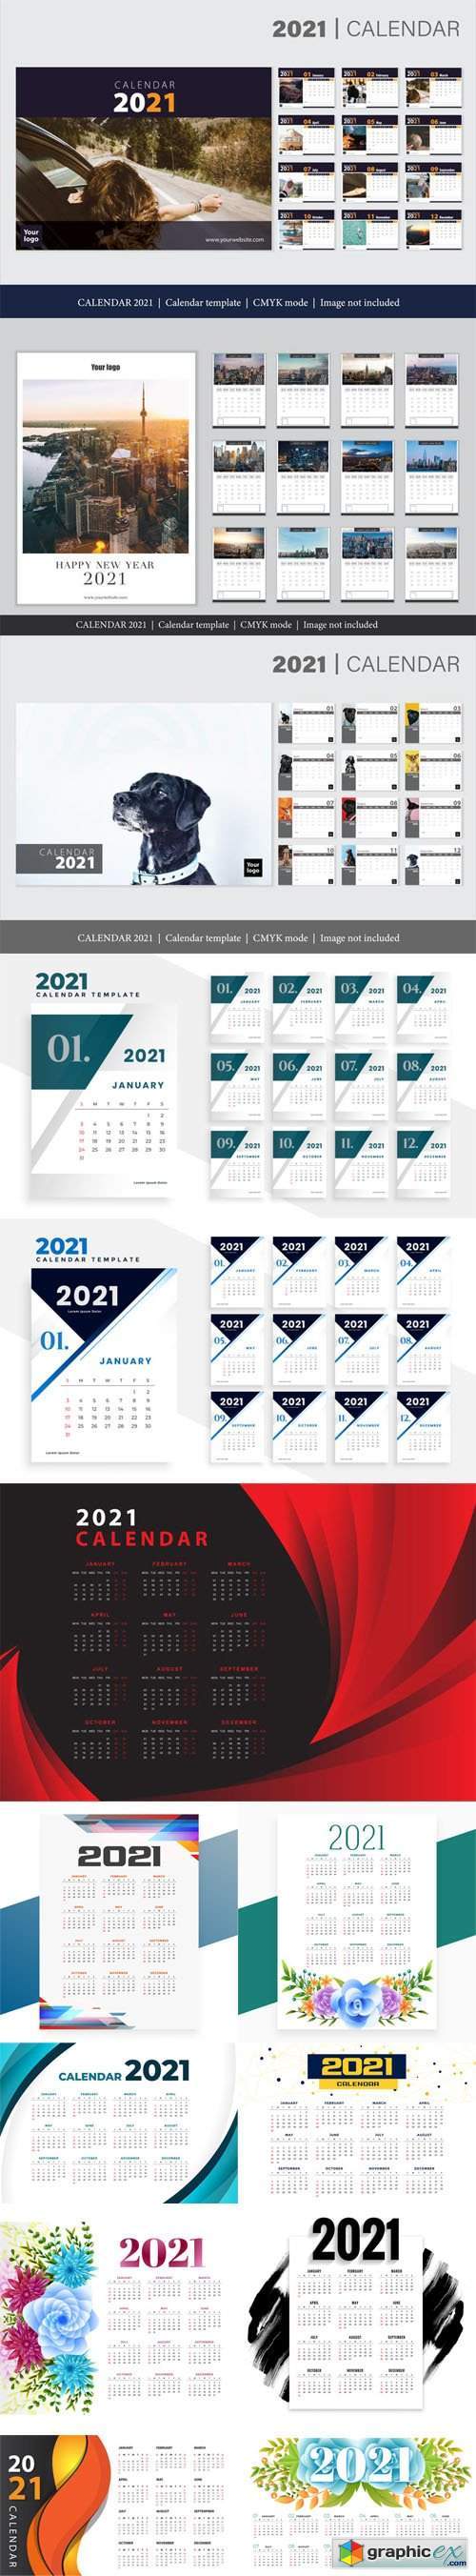 14 New Year 2021 Calendars Vector Templates Collection